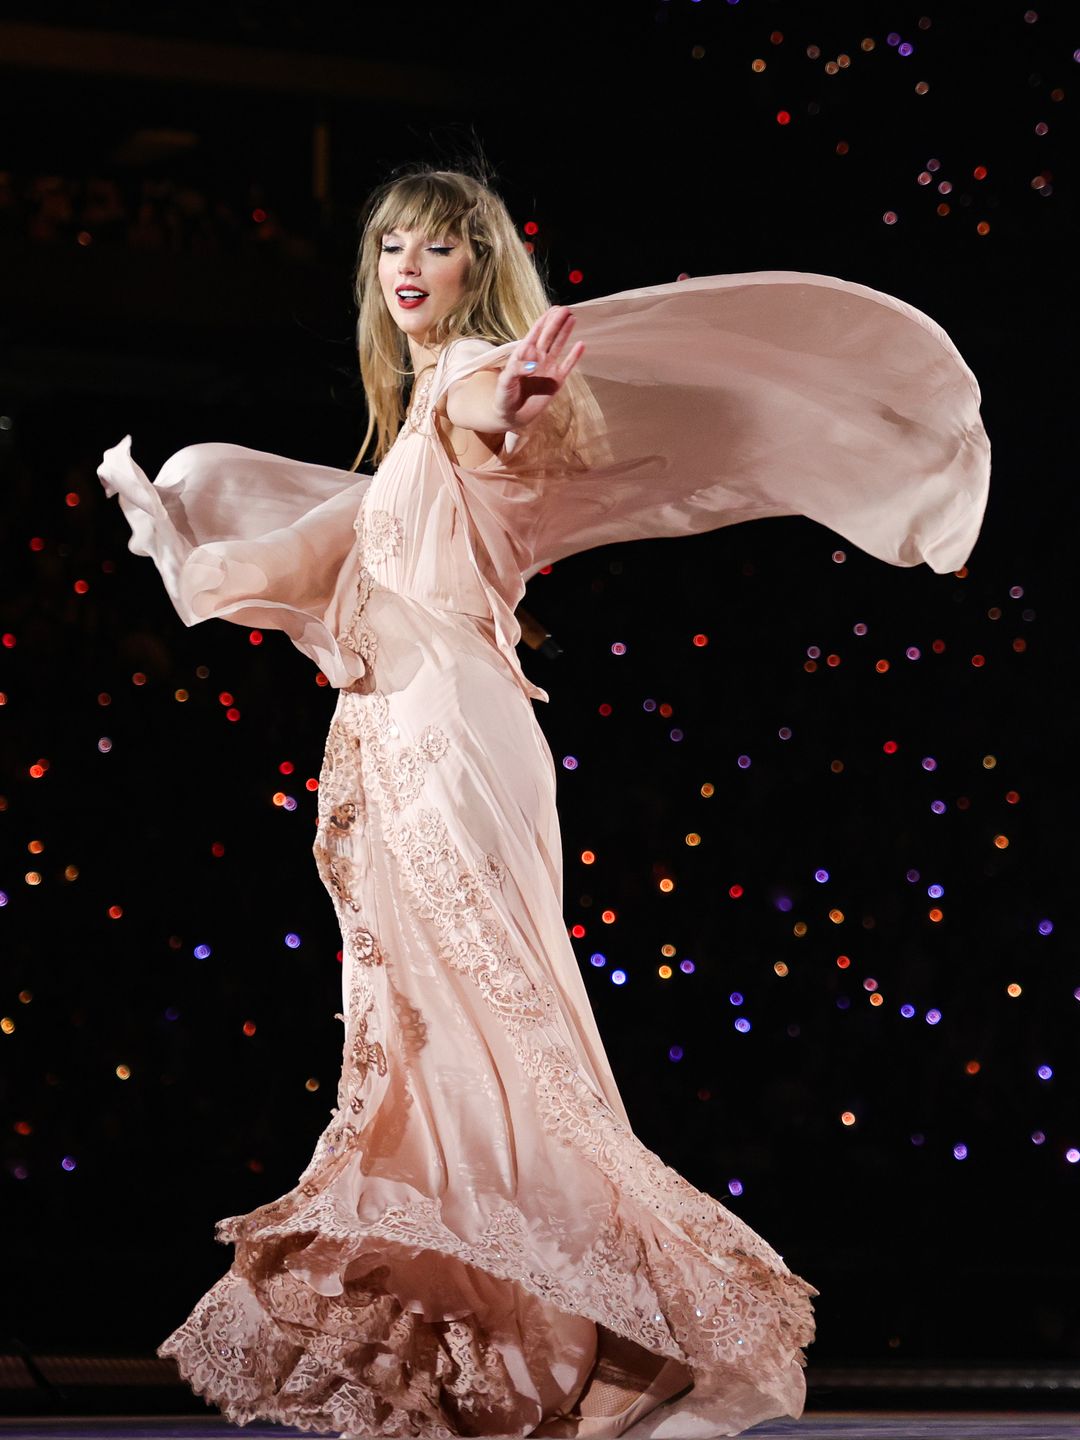 Taylor Swift on stage surrounded by hundreds of fans, her light pink dress billowing behind her